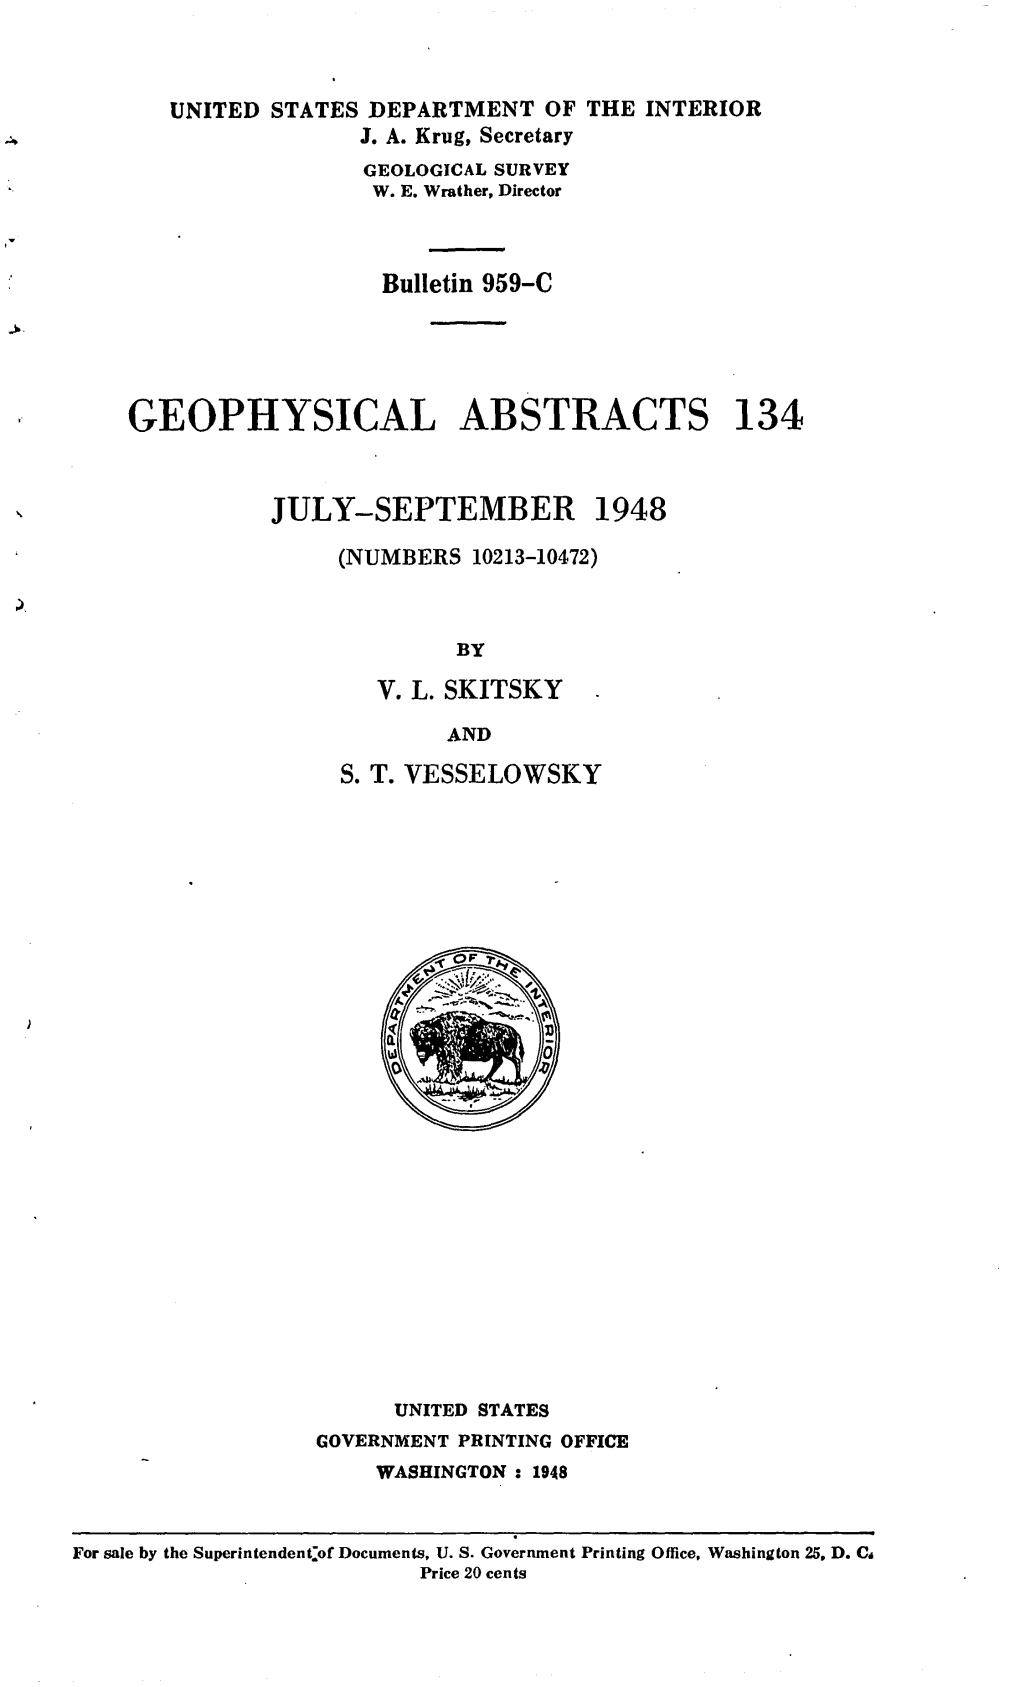 Geophysical Abstracts 134